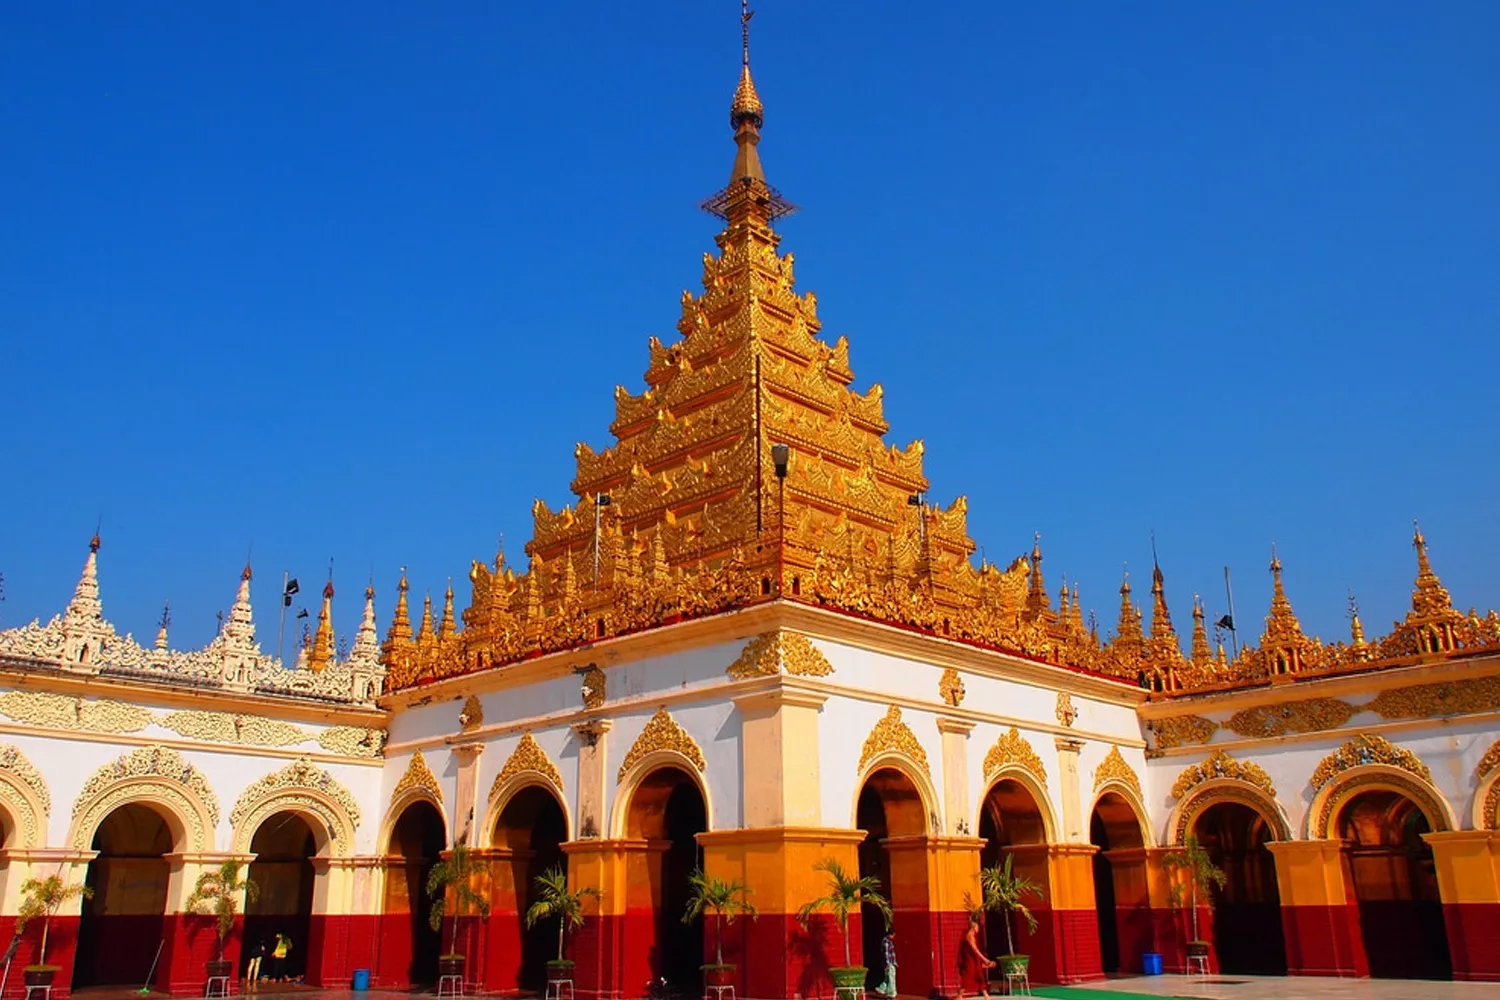 Mahamuni Buddha Temple in Myanmar, Central Asia | Architecture - Rated 3.7